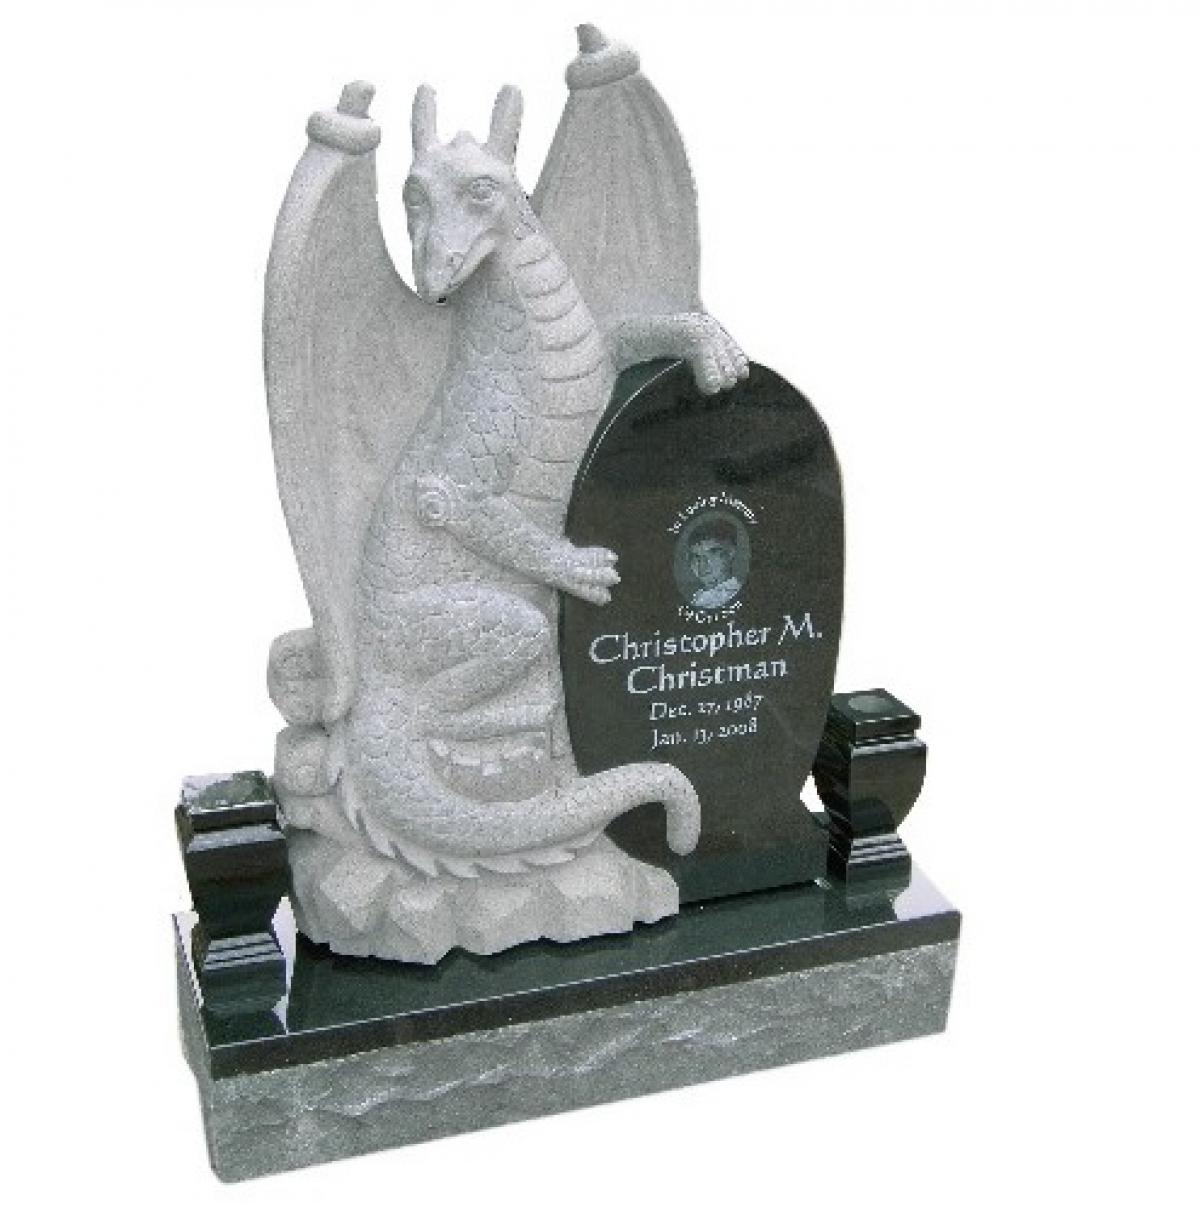 OK, Grove, Headstone Symbols and Meanings, Dragon